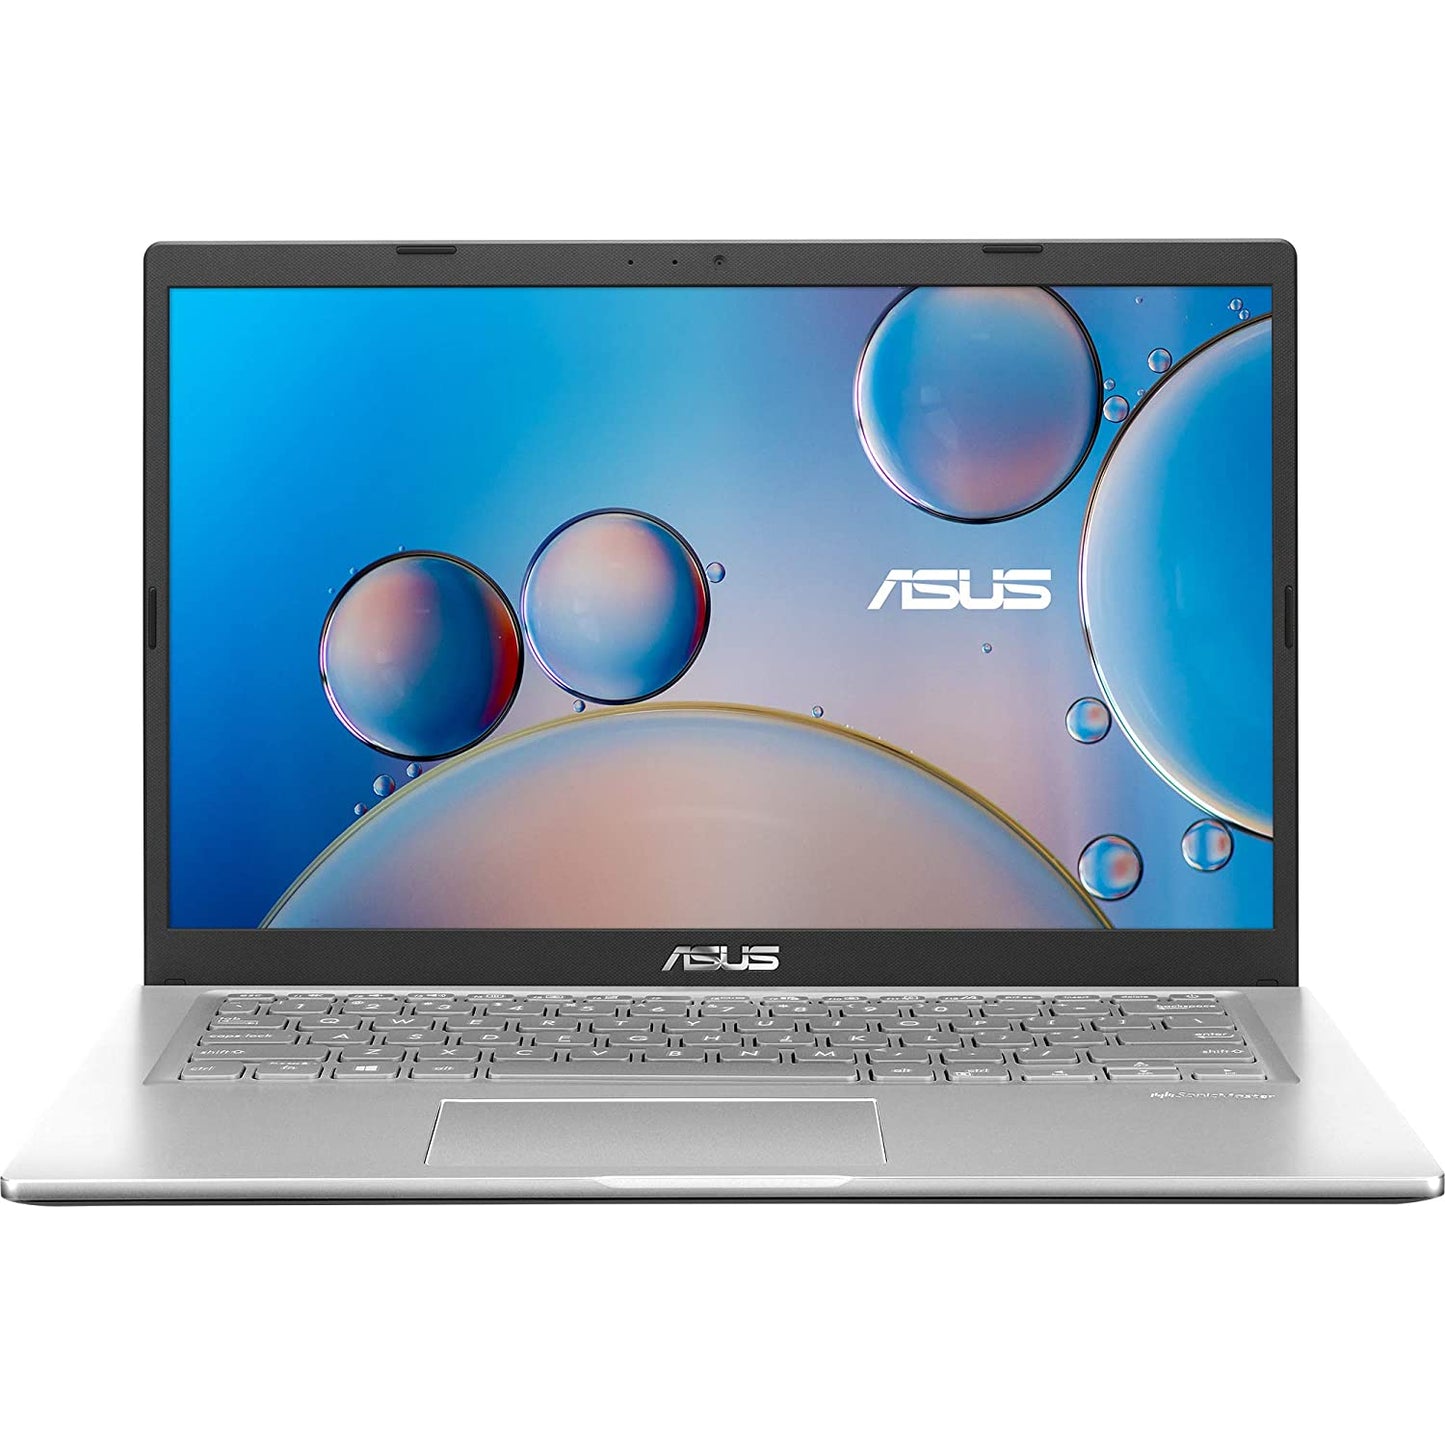 ASUS Vivobook 14, 14-inch (35.56 cms) FHD, Intel Core i3-1115G4 11th Gen, Thin and Light Laptop (8GB/512GB SSD/Windows 11/Office 2021/Silver/1.6 Kg), X415EA-EB322WS, Transparent Silver